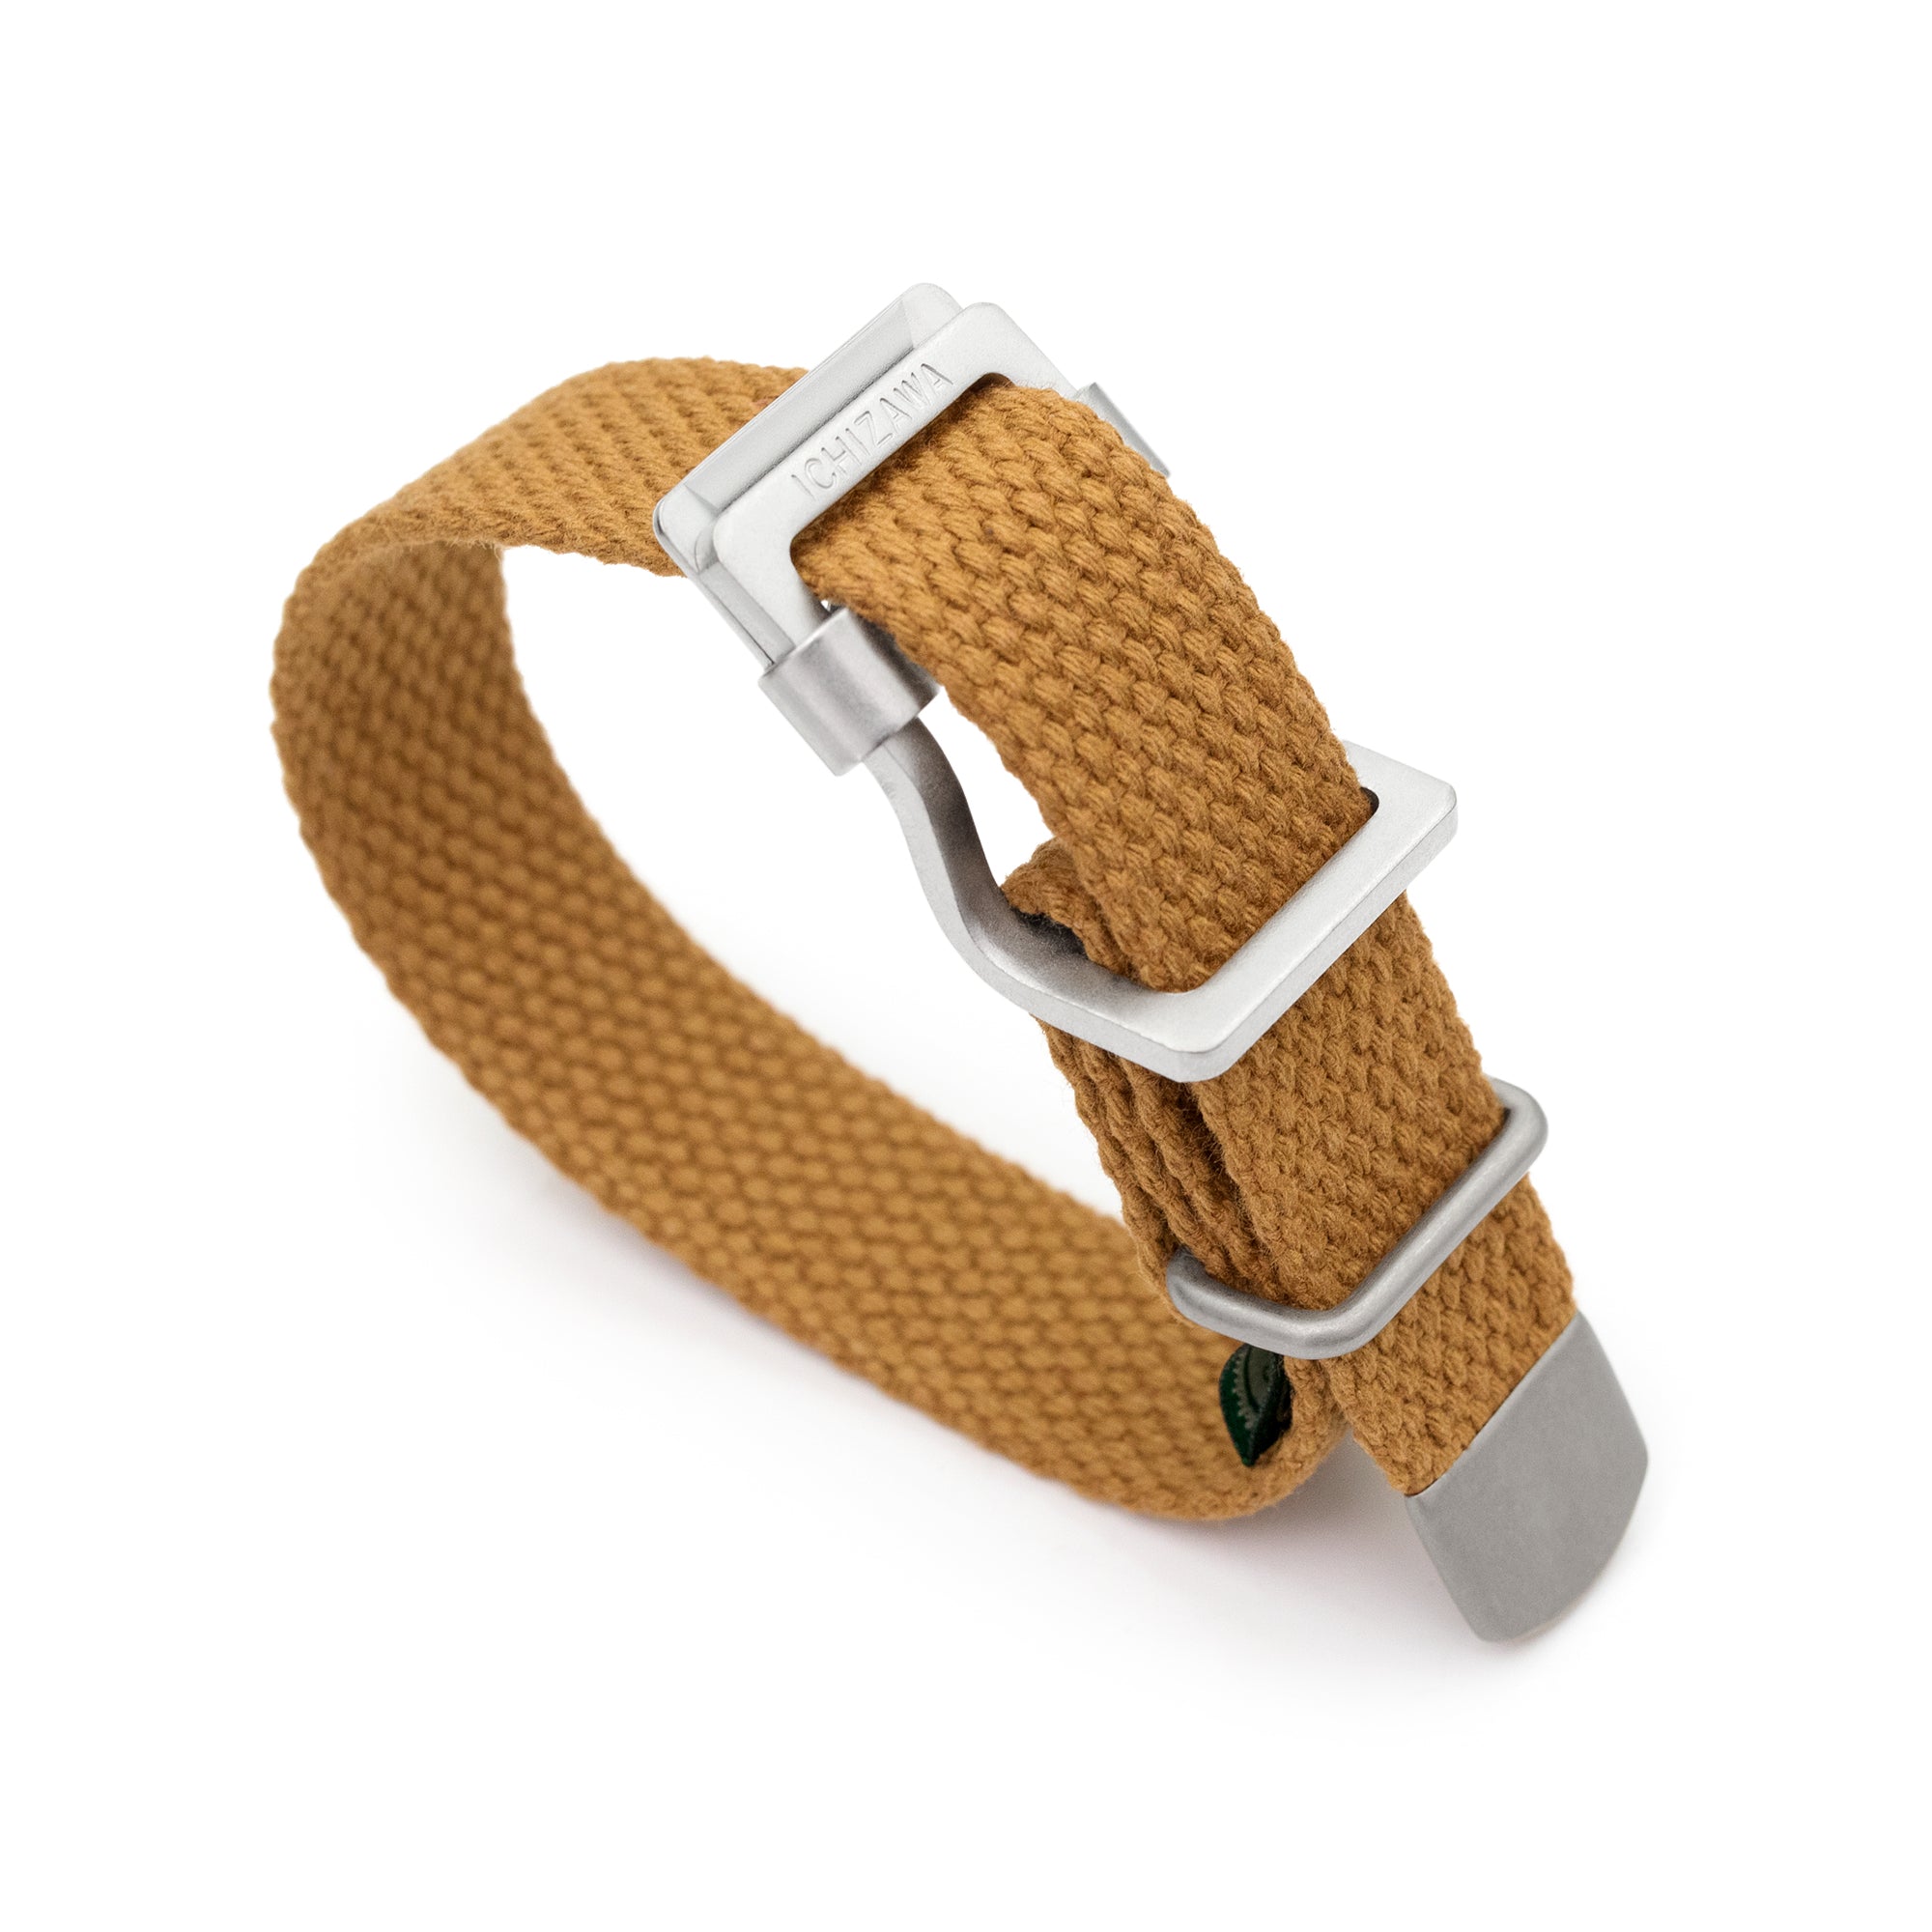 19mm Japanese Heavy Cotton Canvas Watch Strap, Light Brown Strapcode watch bands